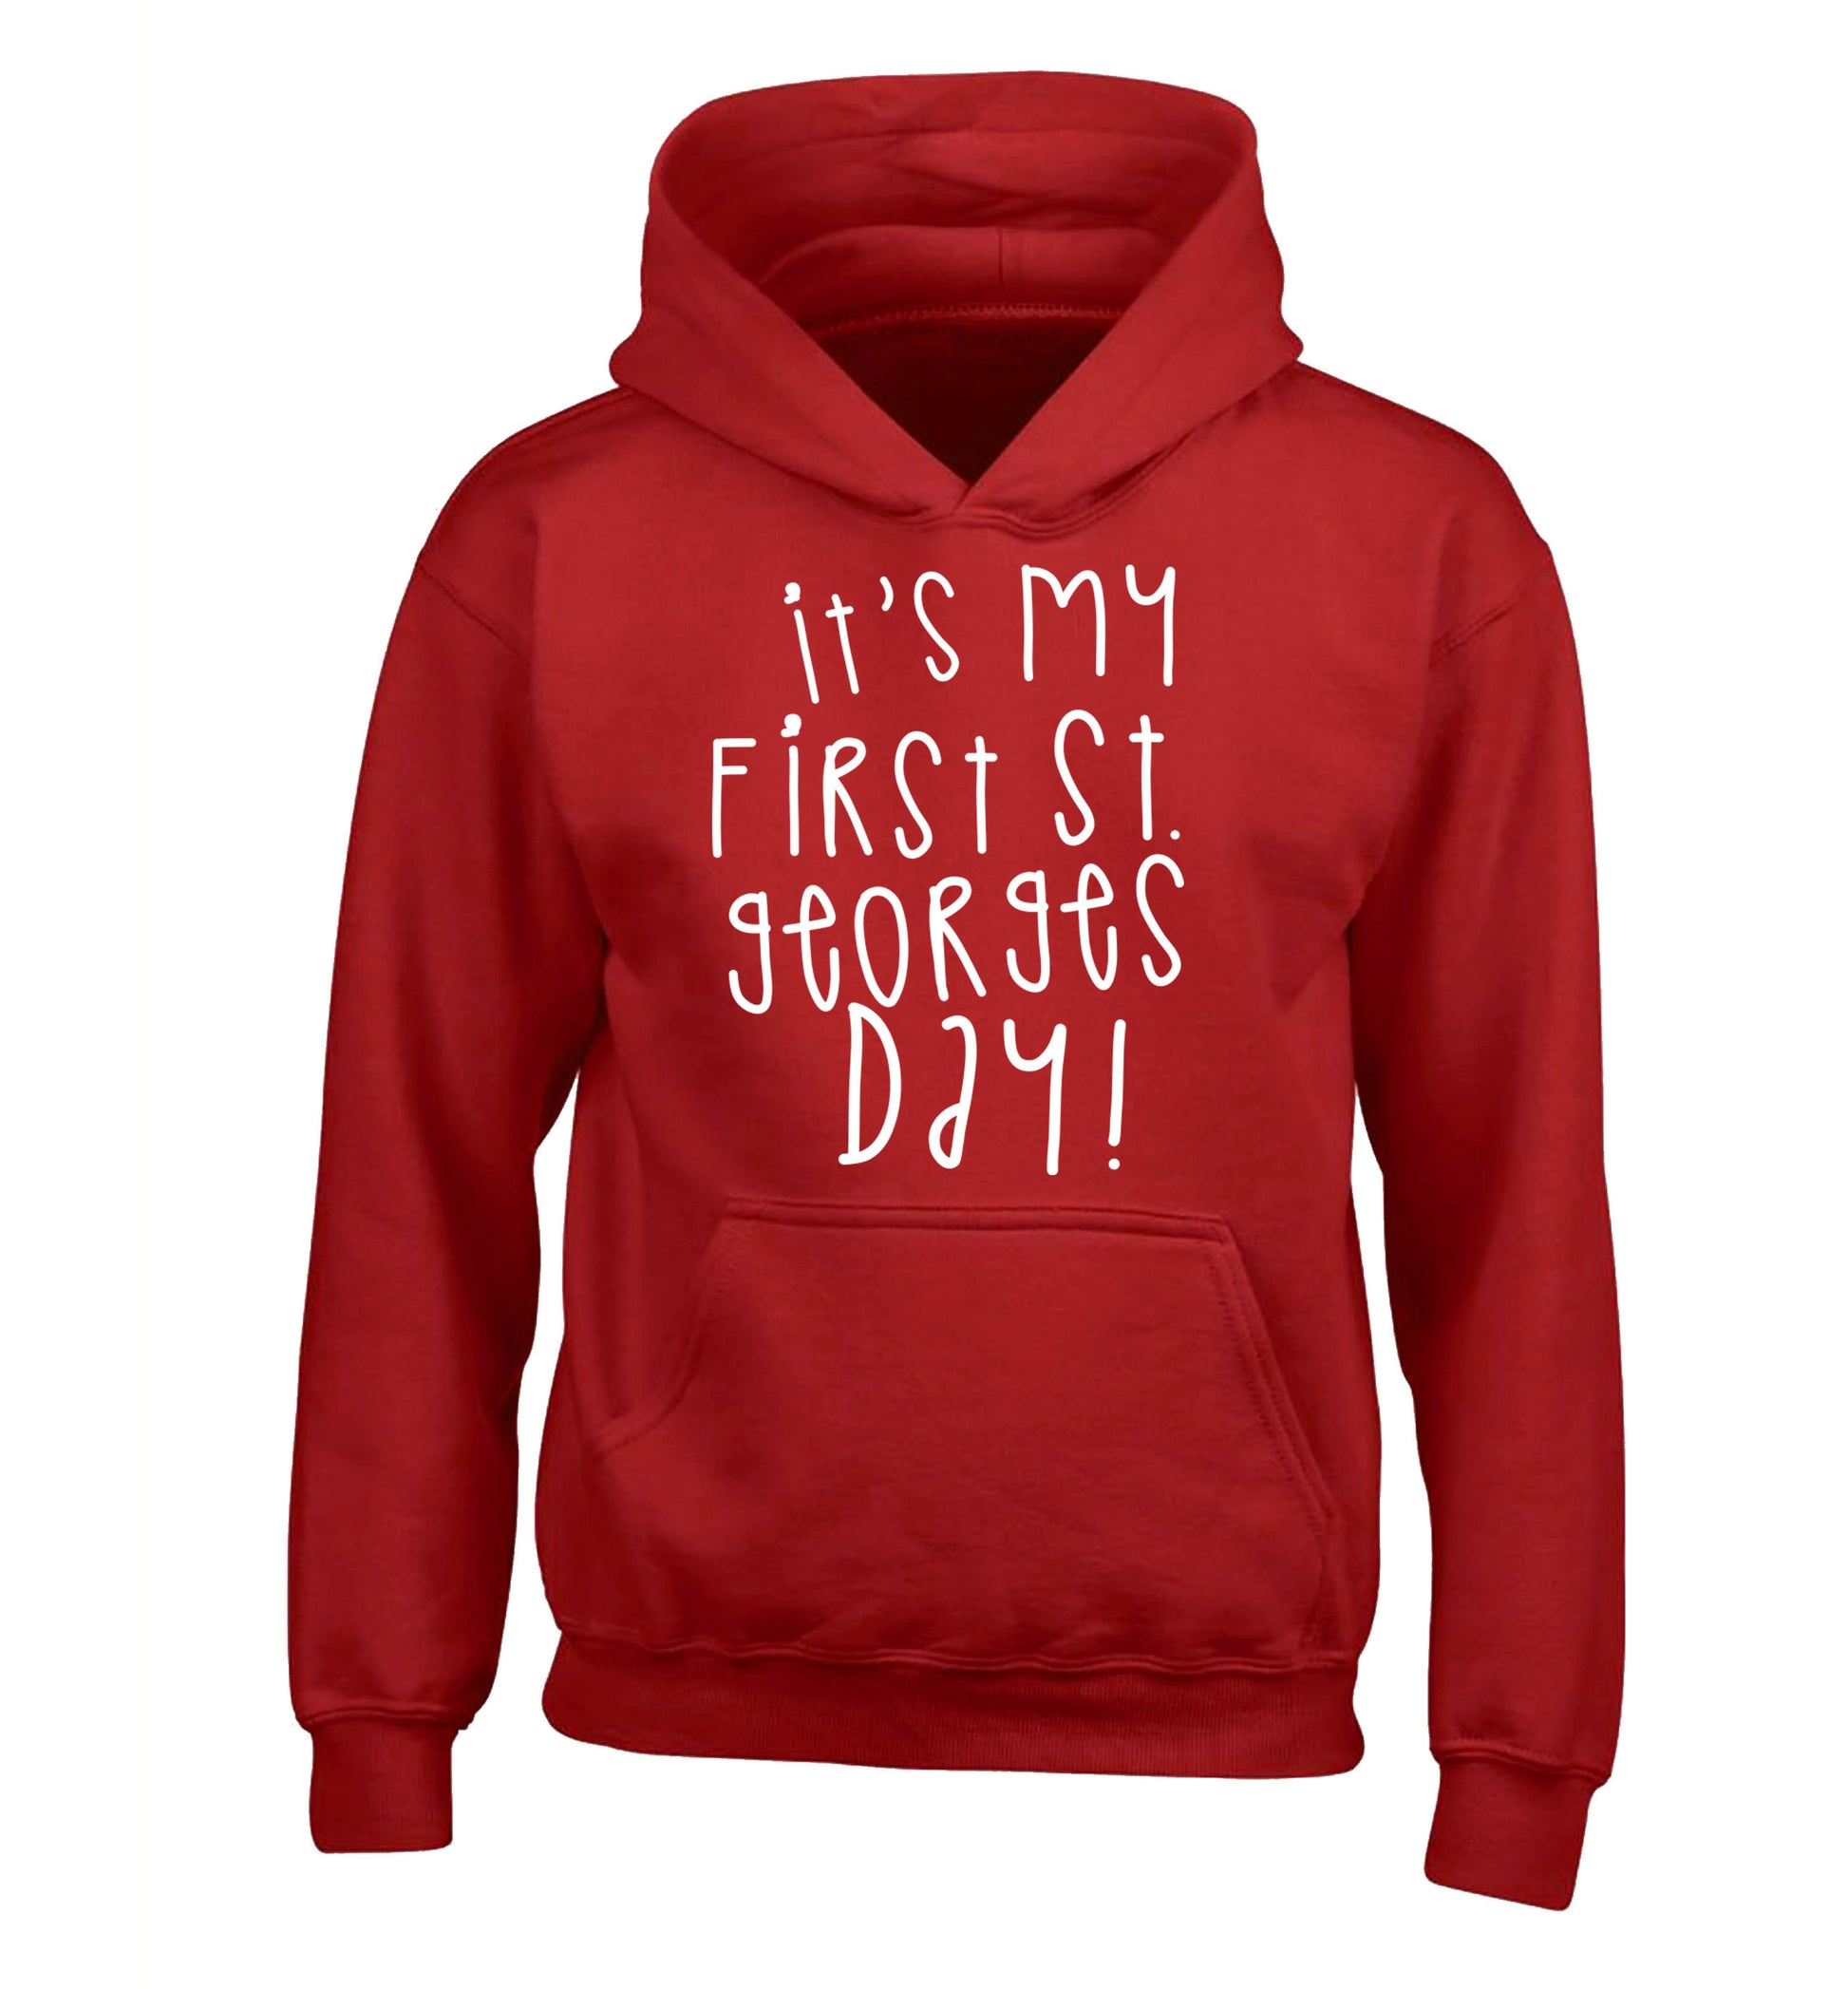 It's my first St Georges day children's red hoodie 12-14 Years